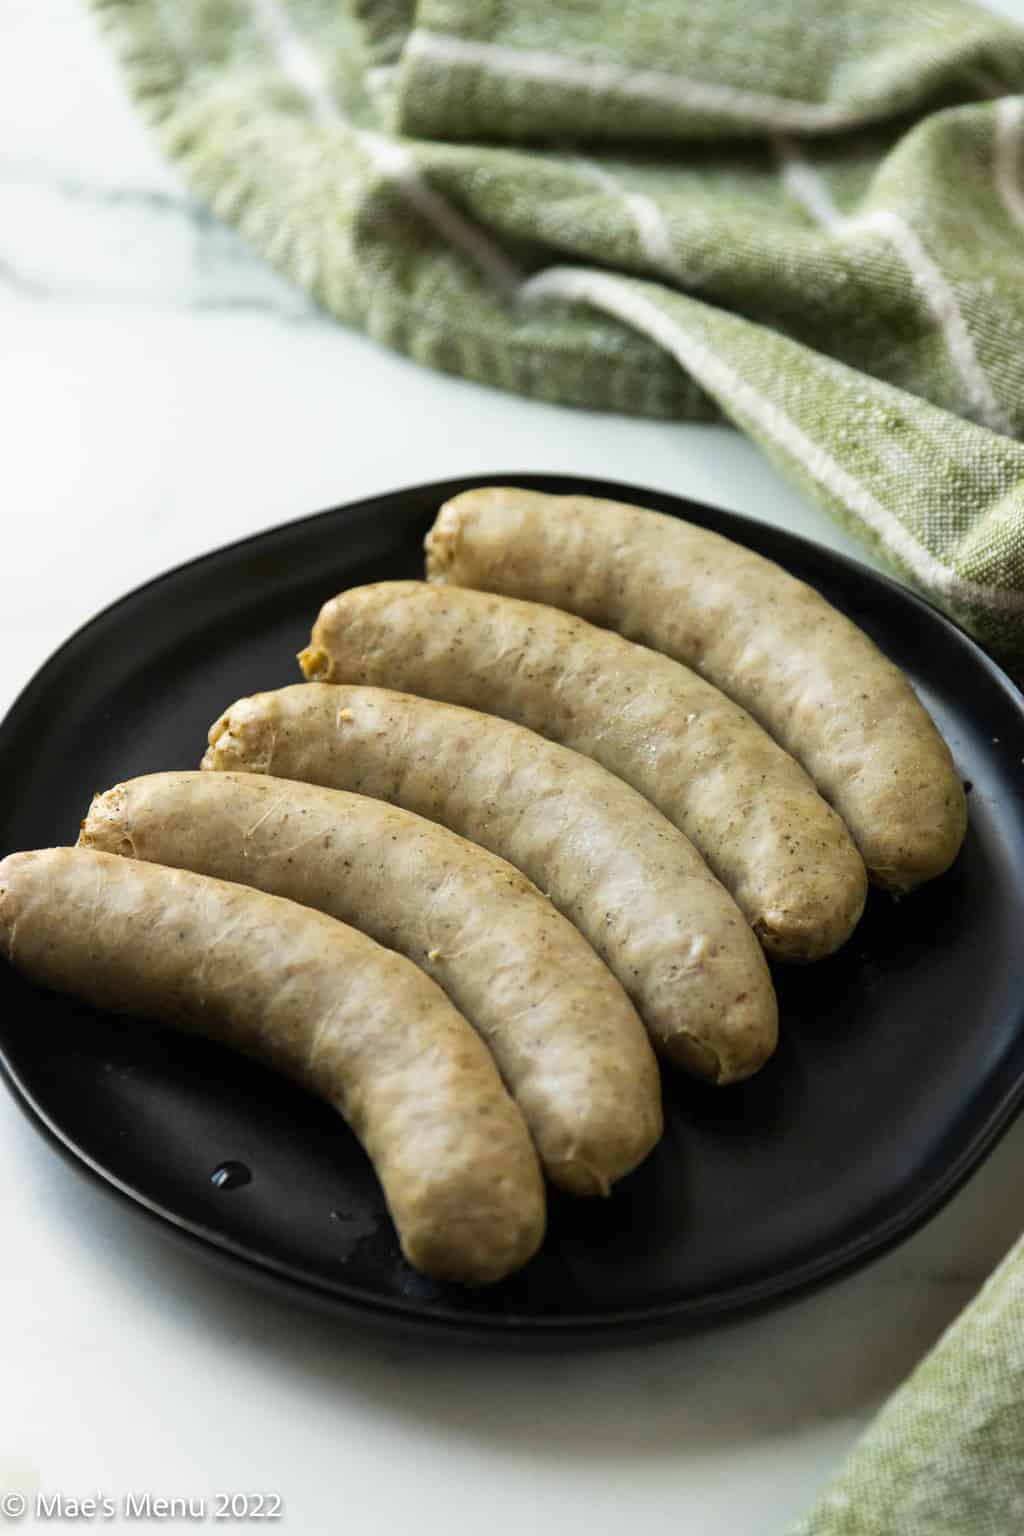 Parboiled brats on a black plate.